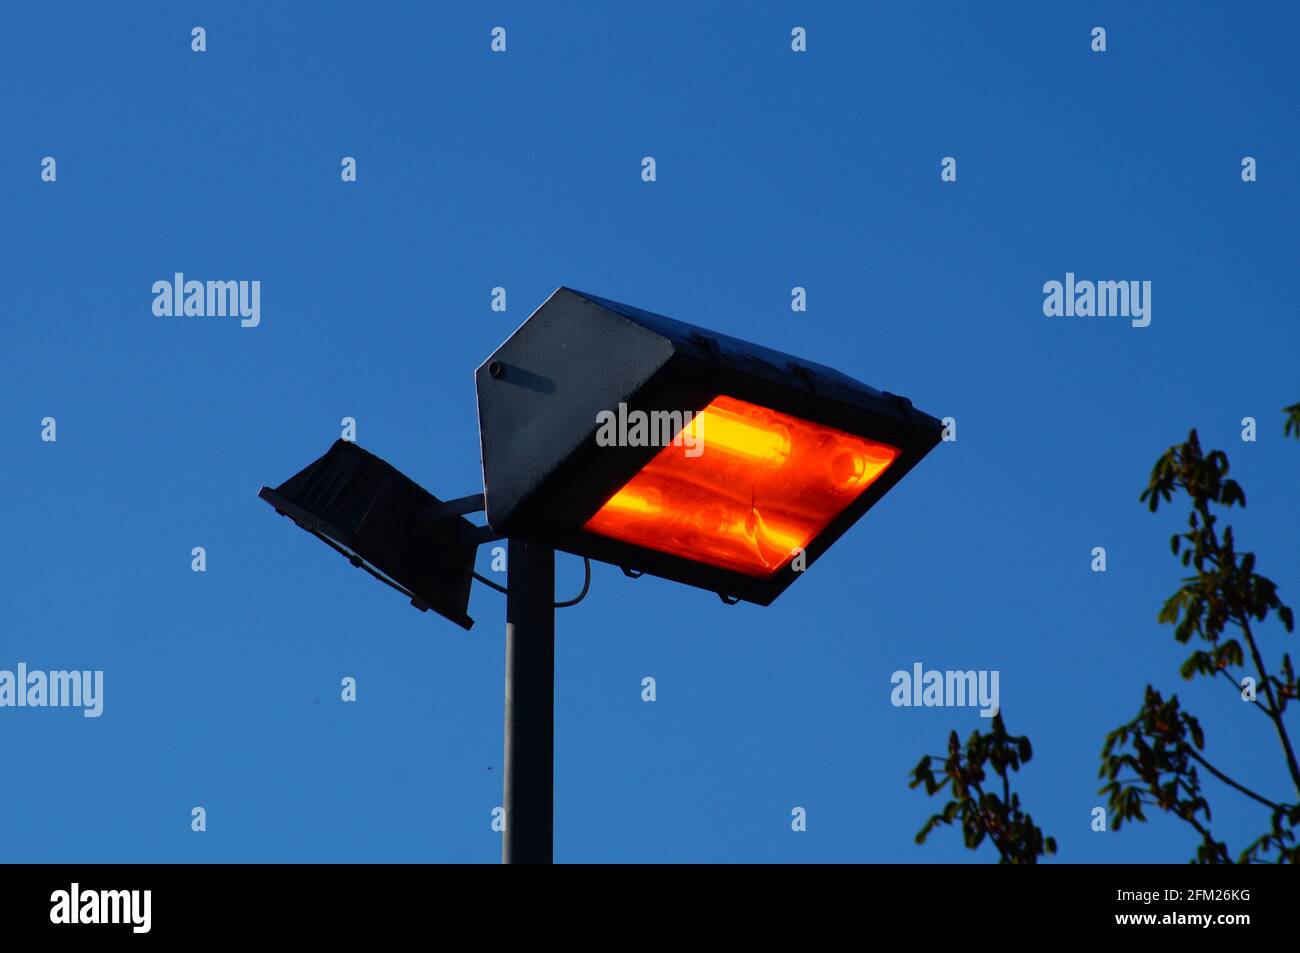 Waste of energy: A floodlight burns in bright sunlight. Stock Photo